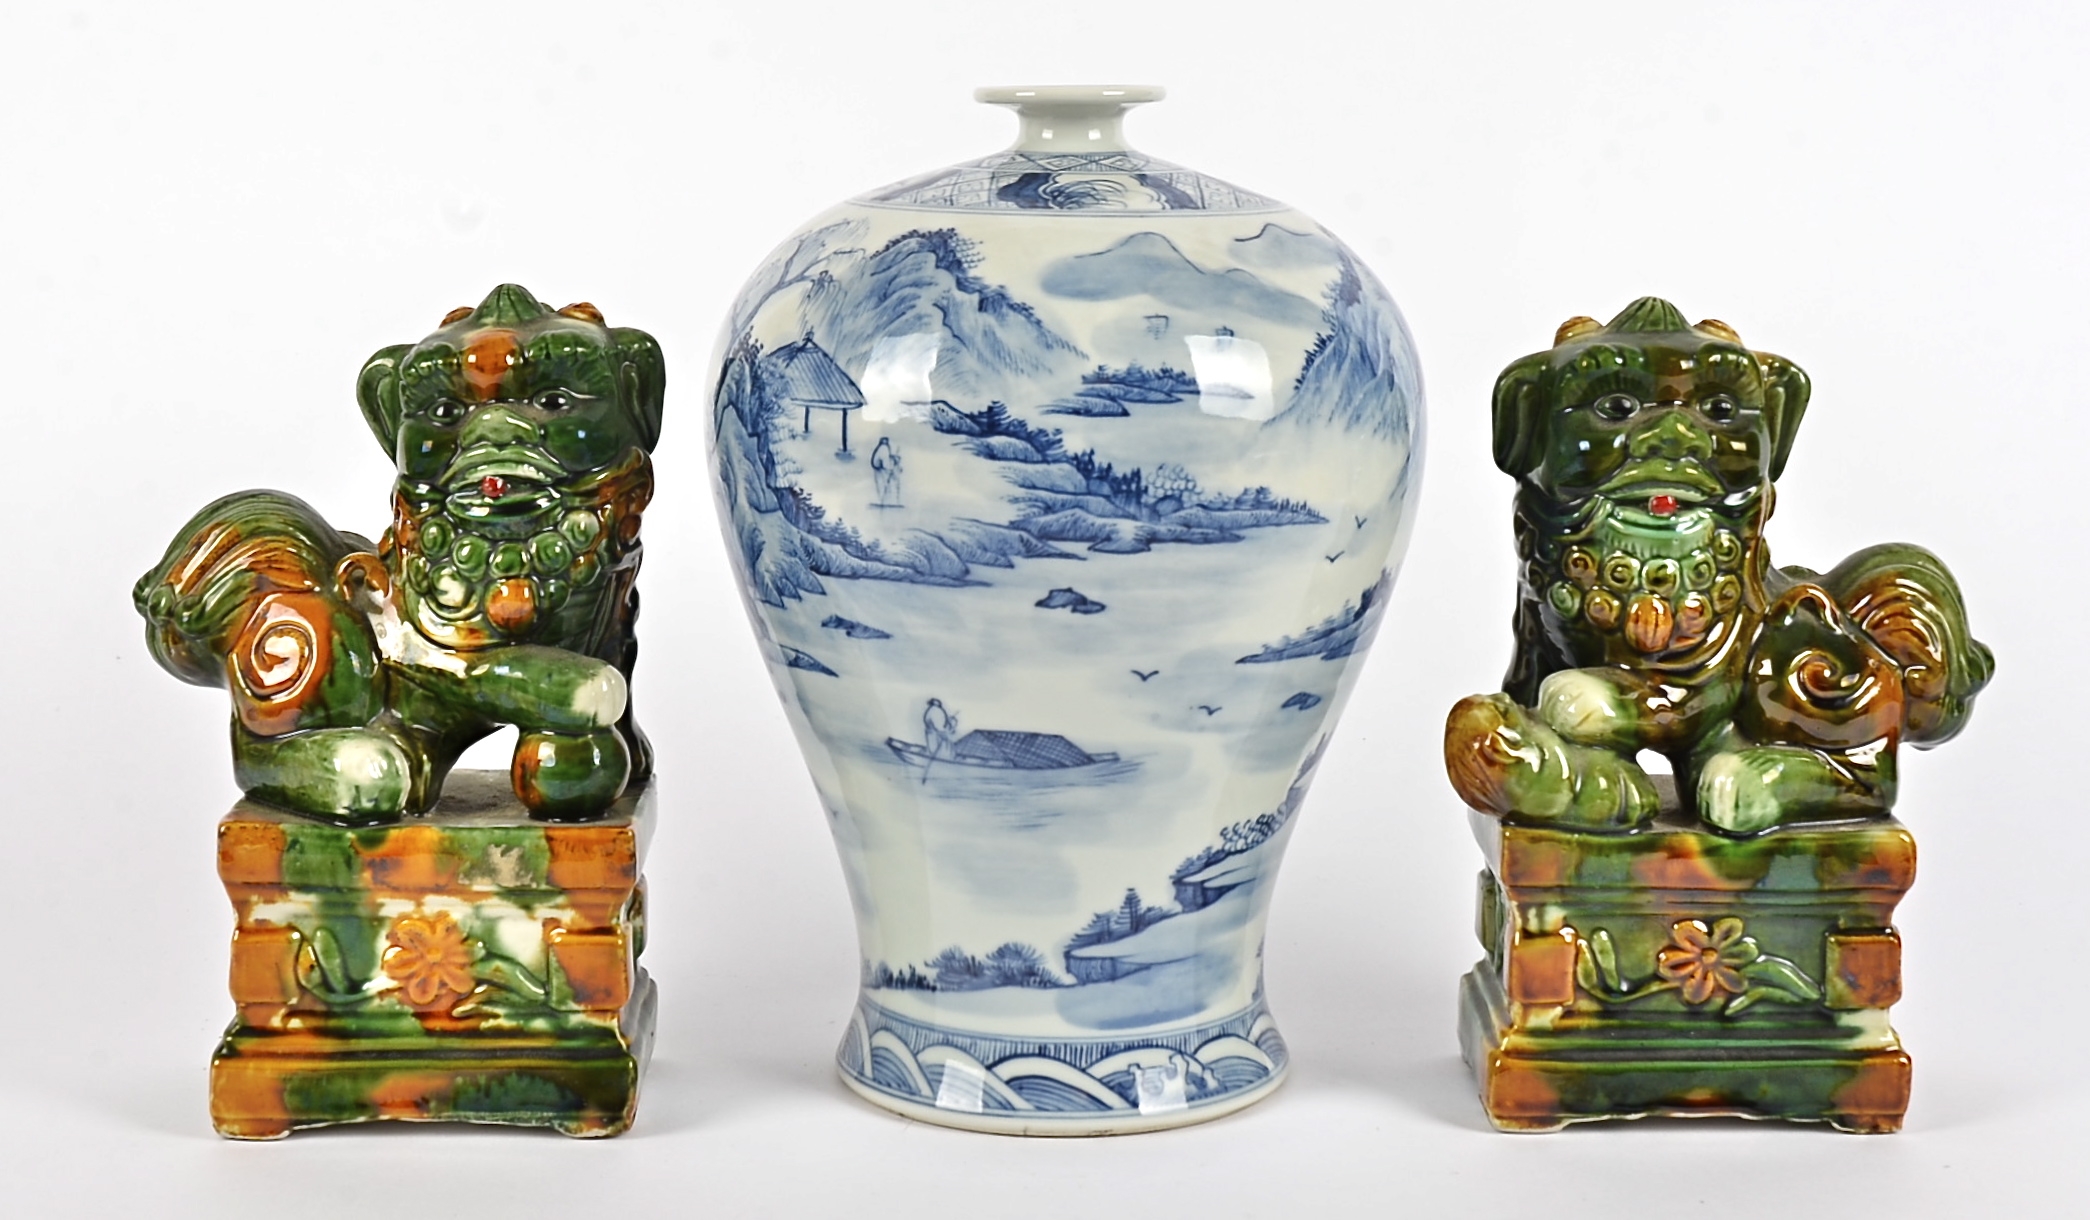 A pair of Chinese sancai glazed Dogs of Fo raised on plinths, each holding an object underfoot,